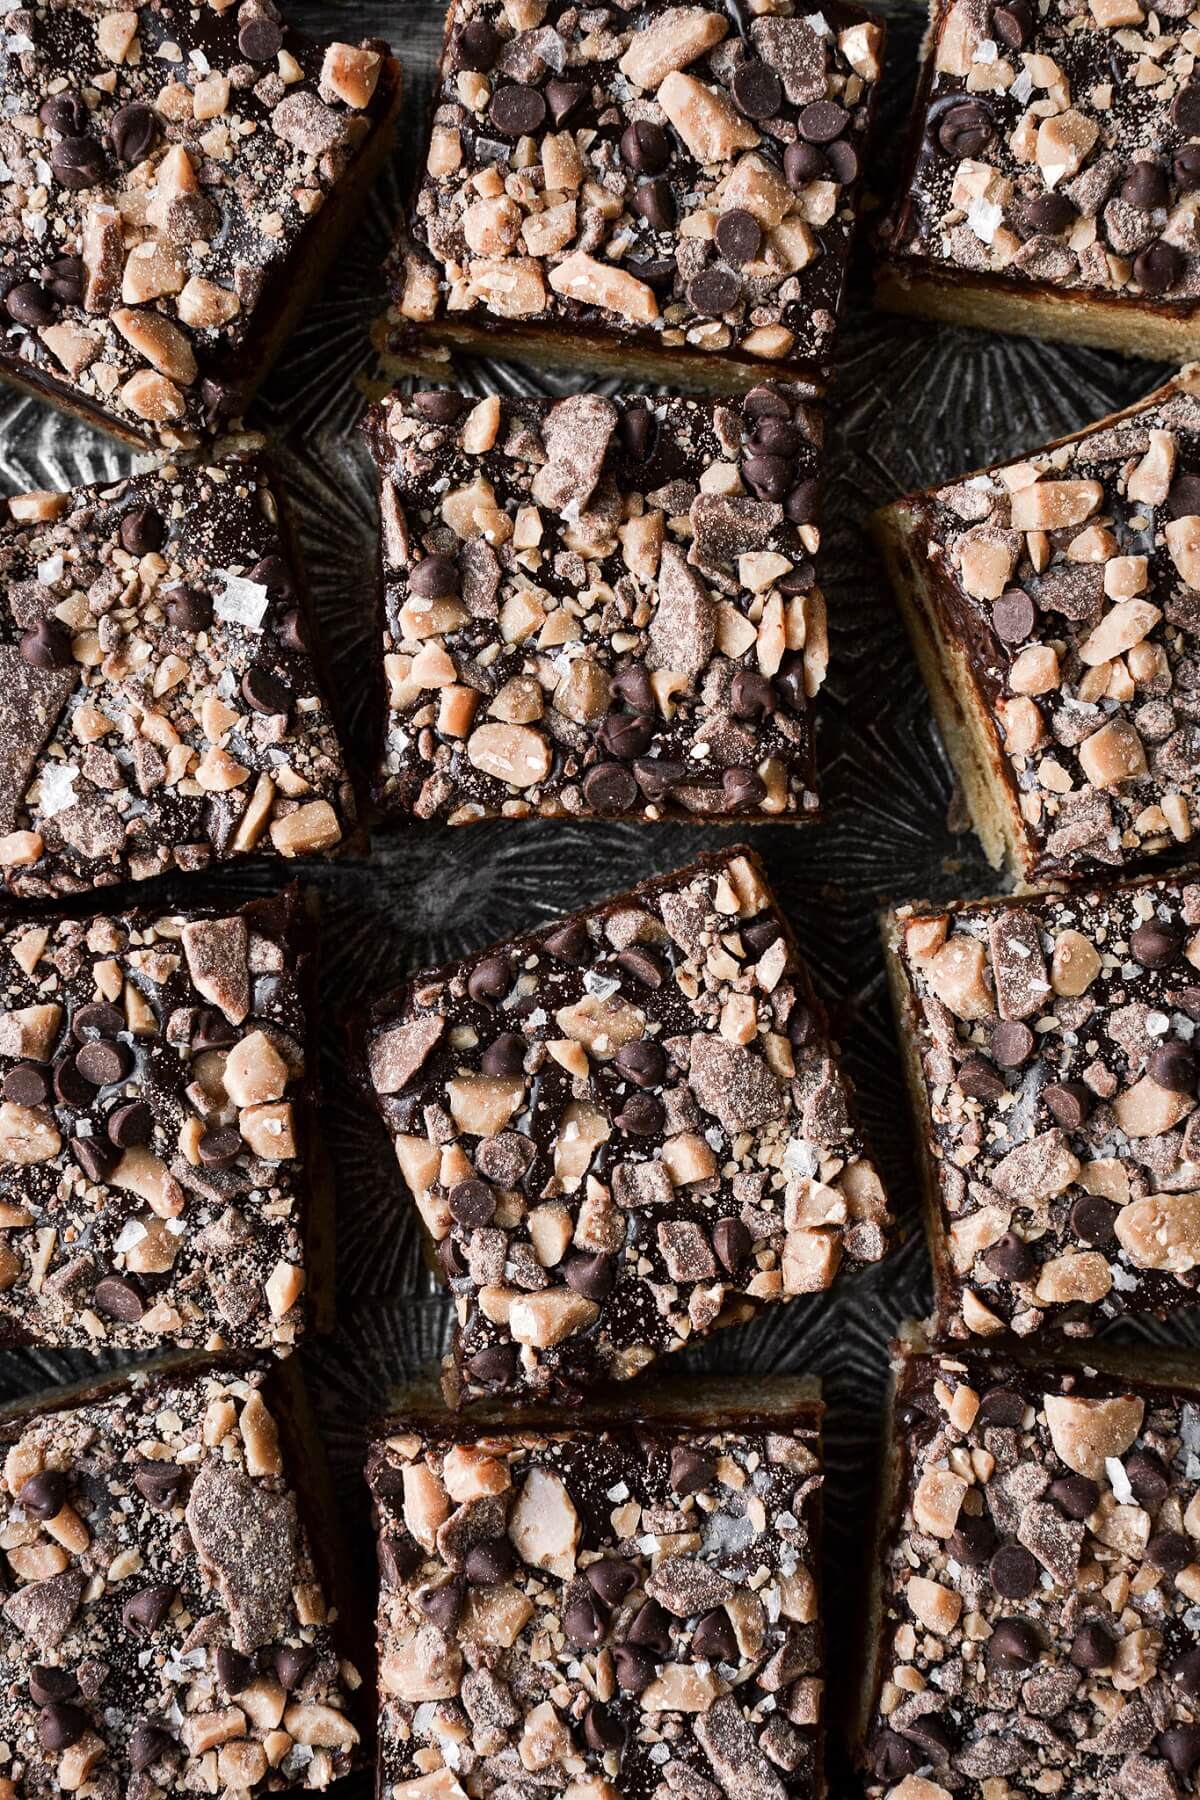 Blondies with ganache and toffee, cut into squares.